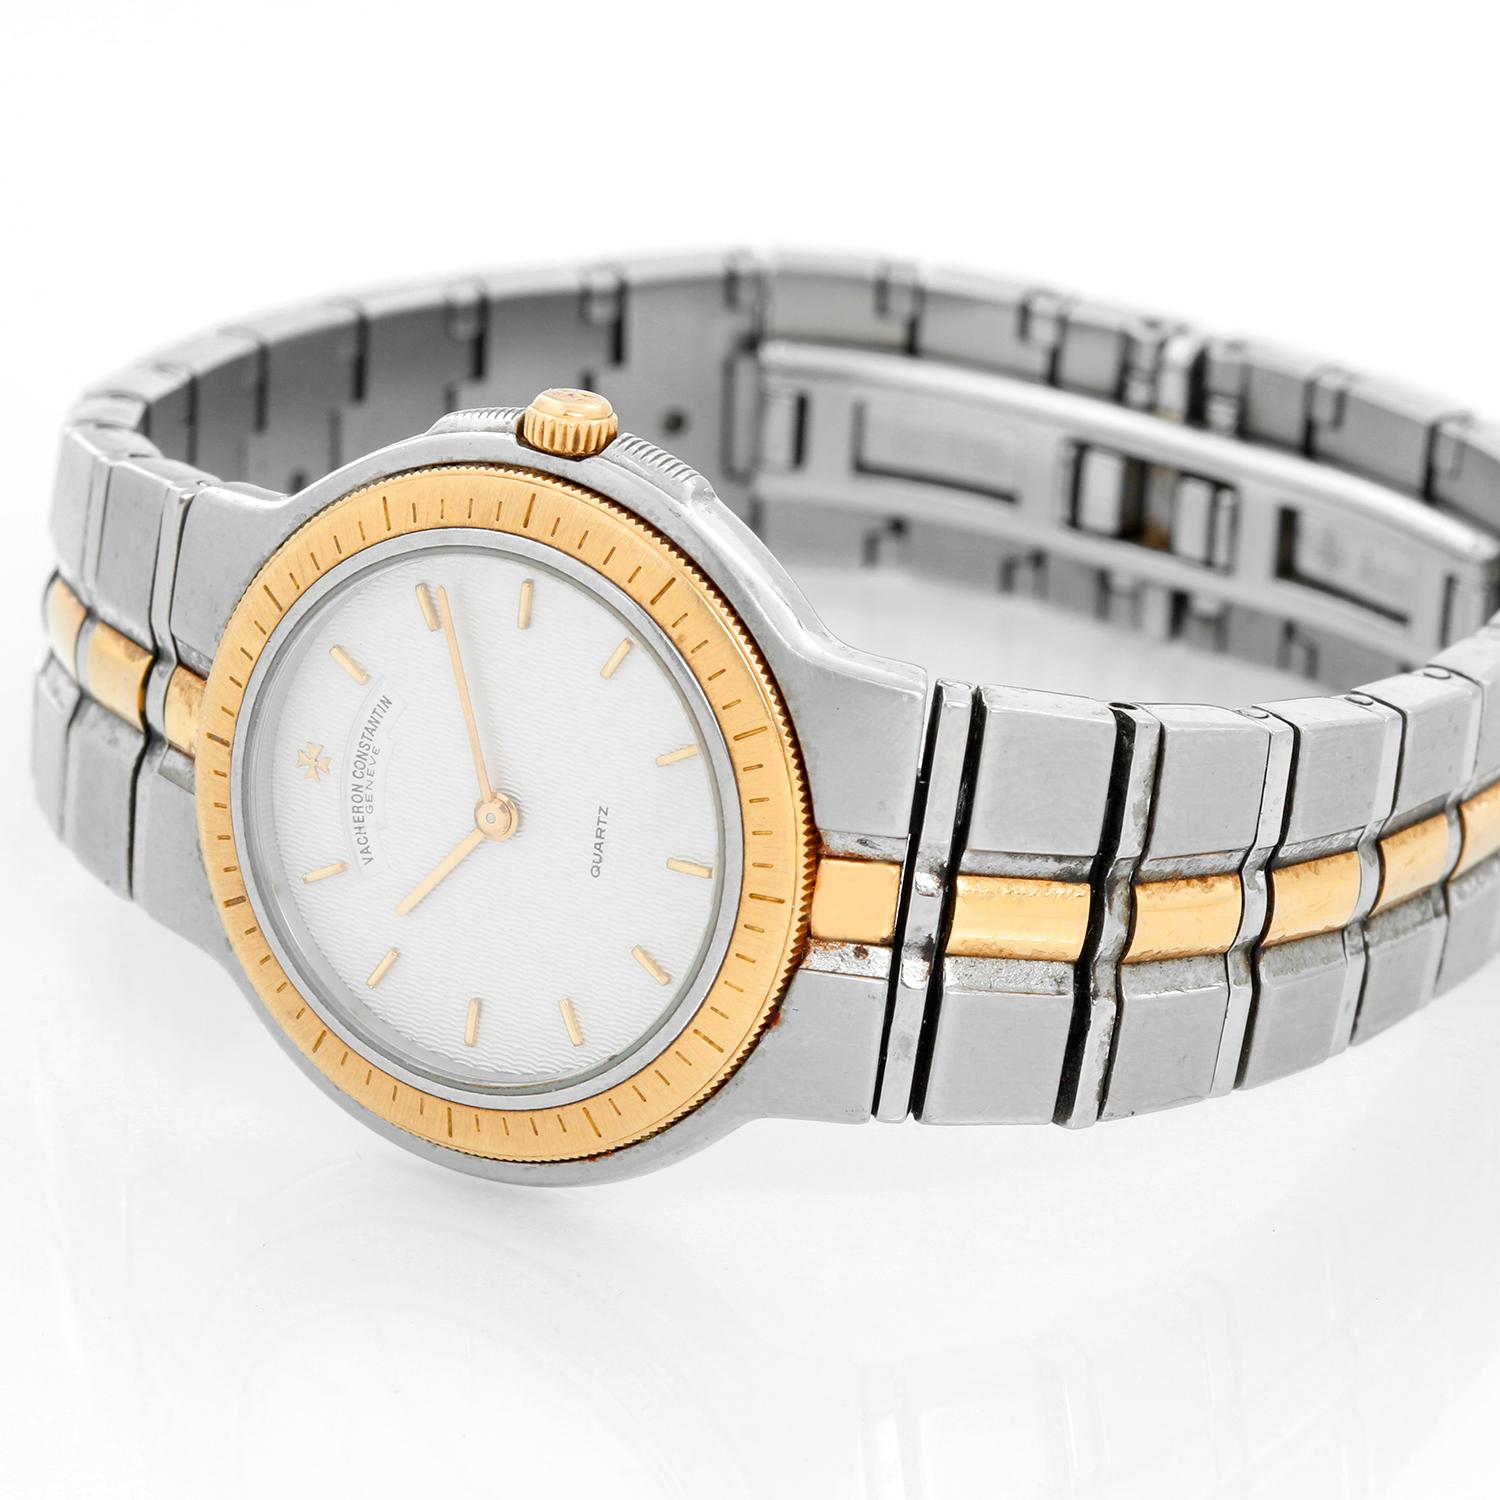 Vacheron Constantin Ladies Phidias Watch  - Quartz. 18K Yellow gold and stainless steel (28 mm). Textured ivory dial with gold stick hour markers. Two-tone link bracelet; will fit a 6 1/2 bracelet . Pre-owned with Vacheron box and papers